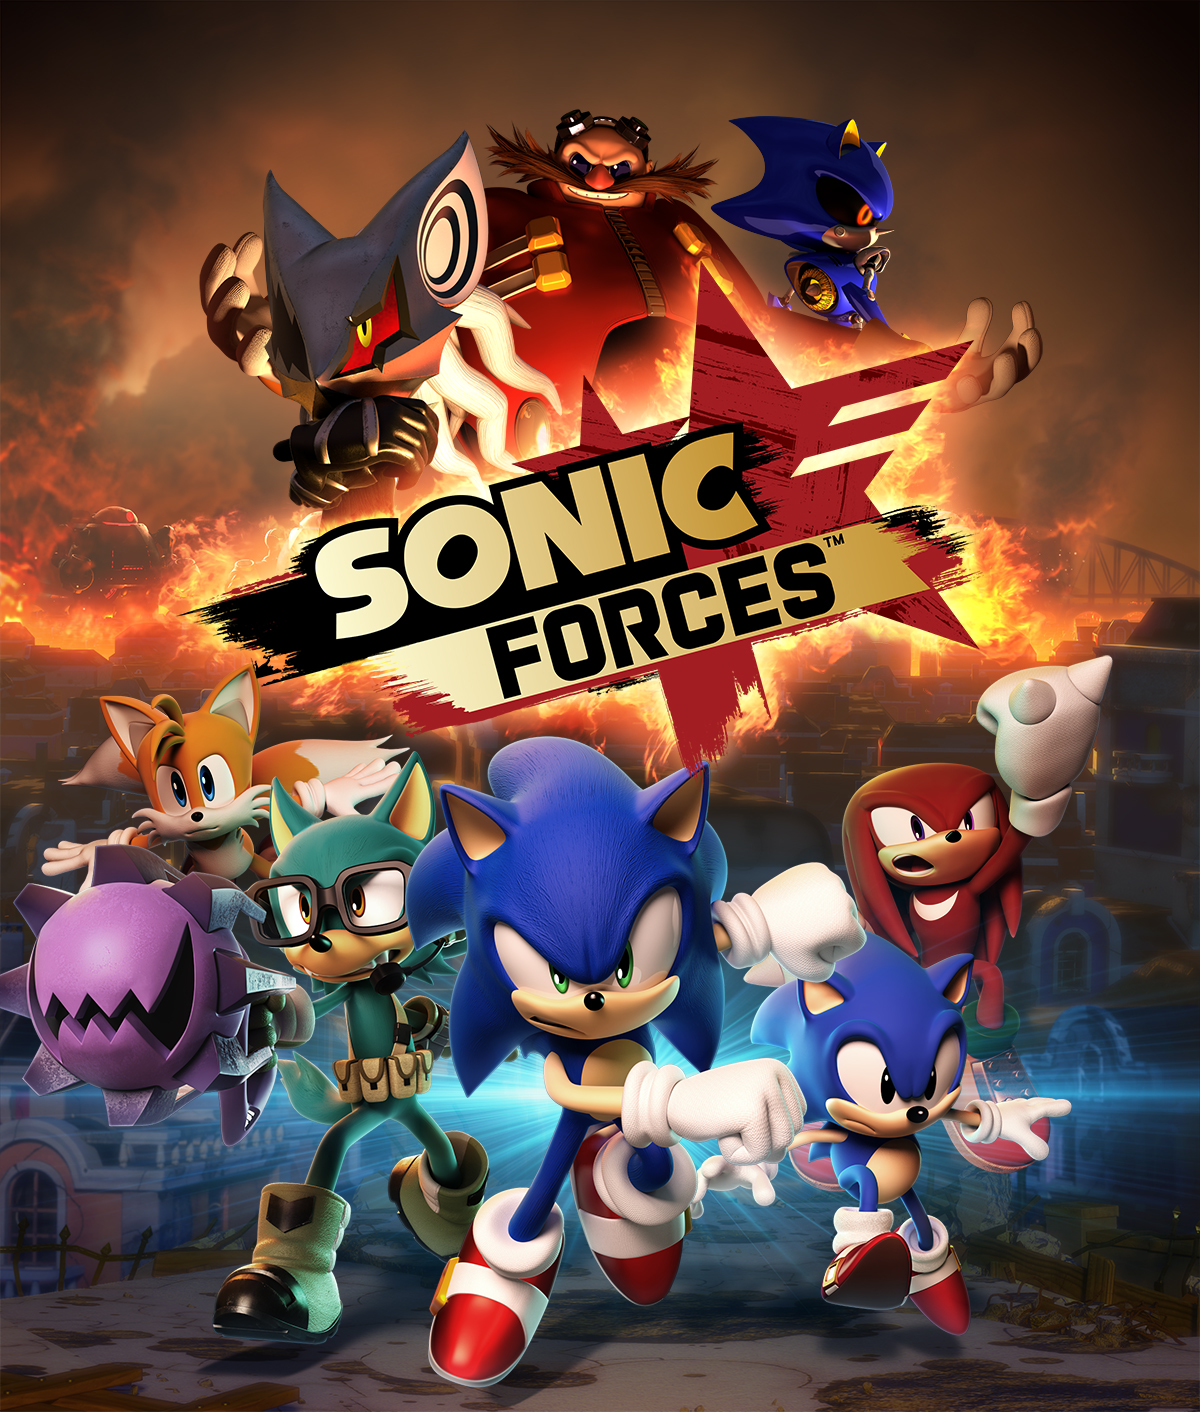 30 Day Gaming Challenge - Sonic Forces Cover Art - HD Wallpaper 